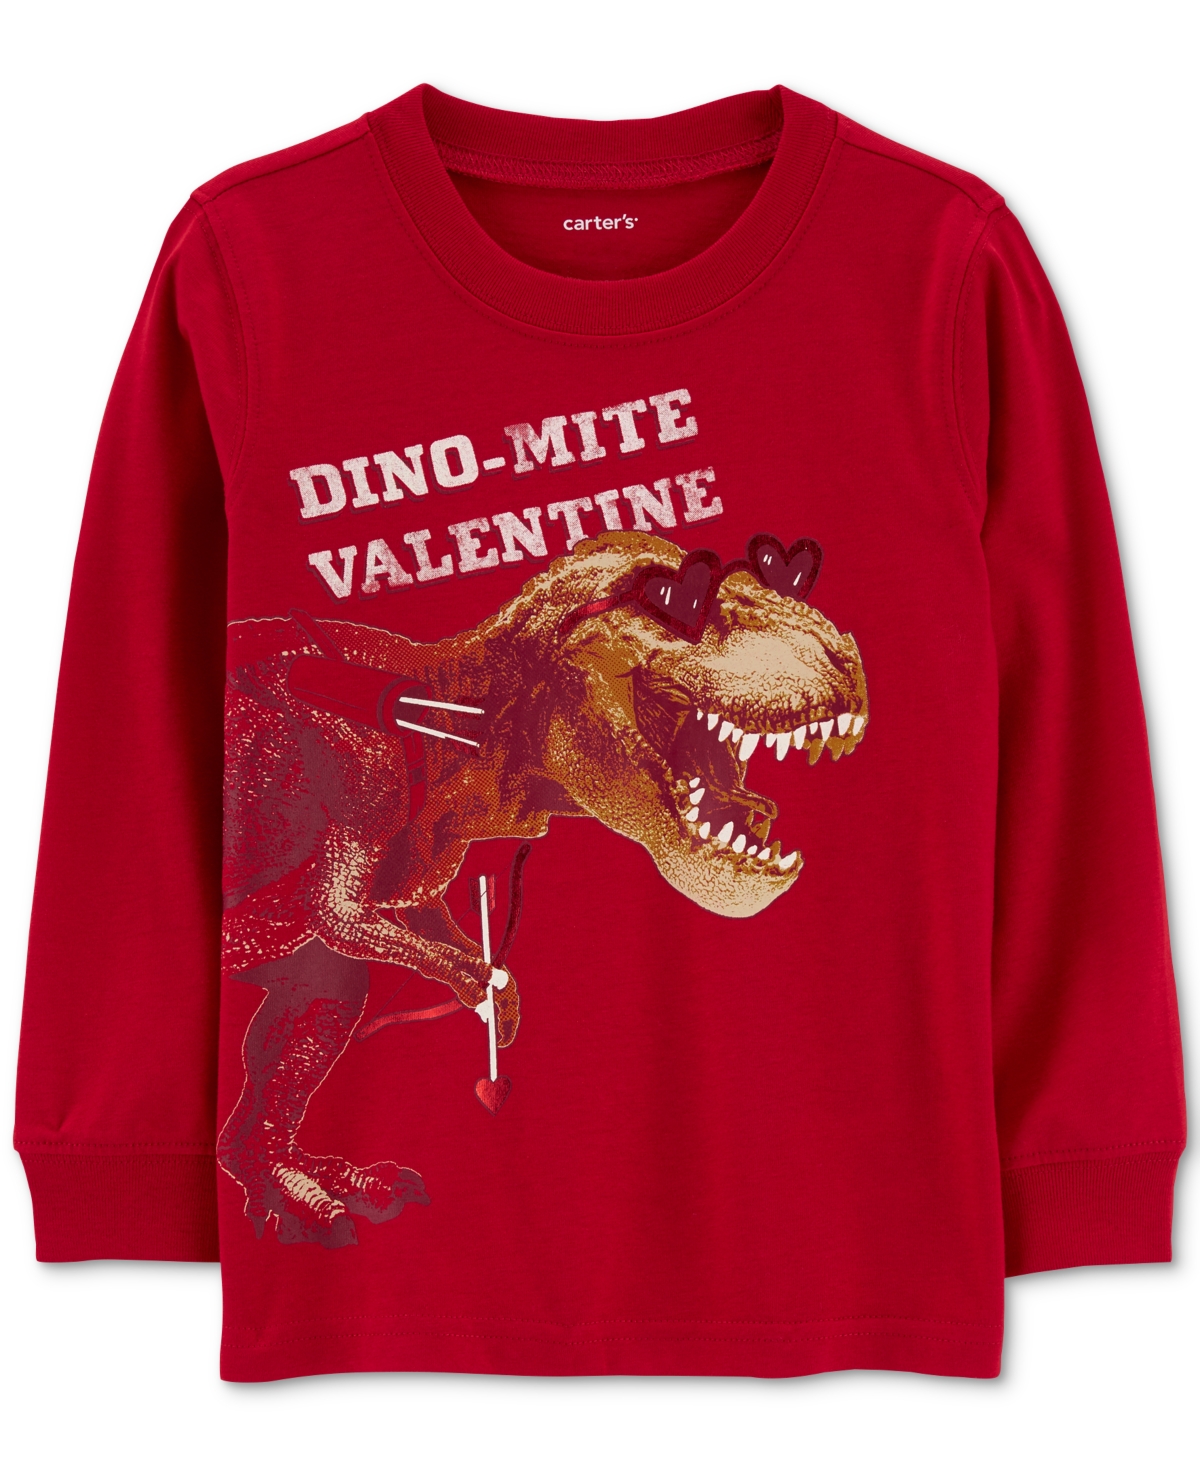 Carter's Babies' Toddler Boys Dino-mite Printed Long-sleeve T-shirt In Red